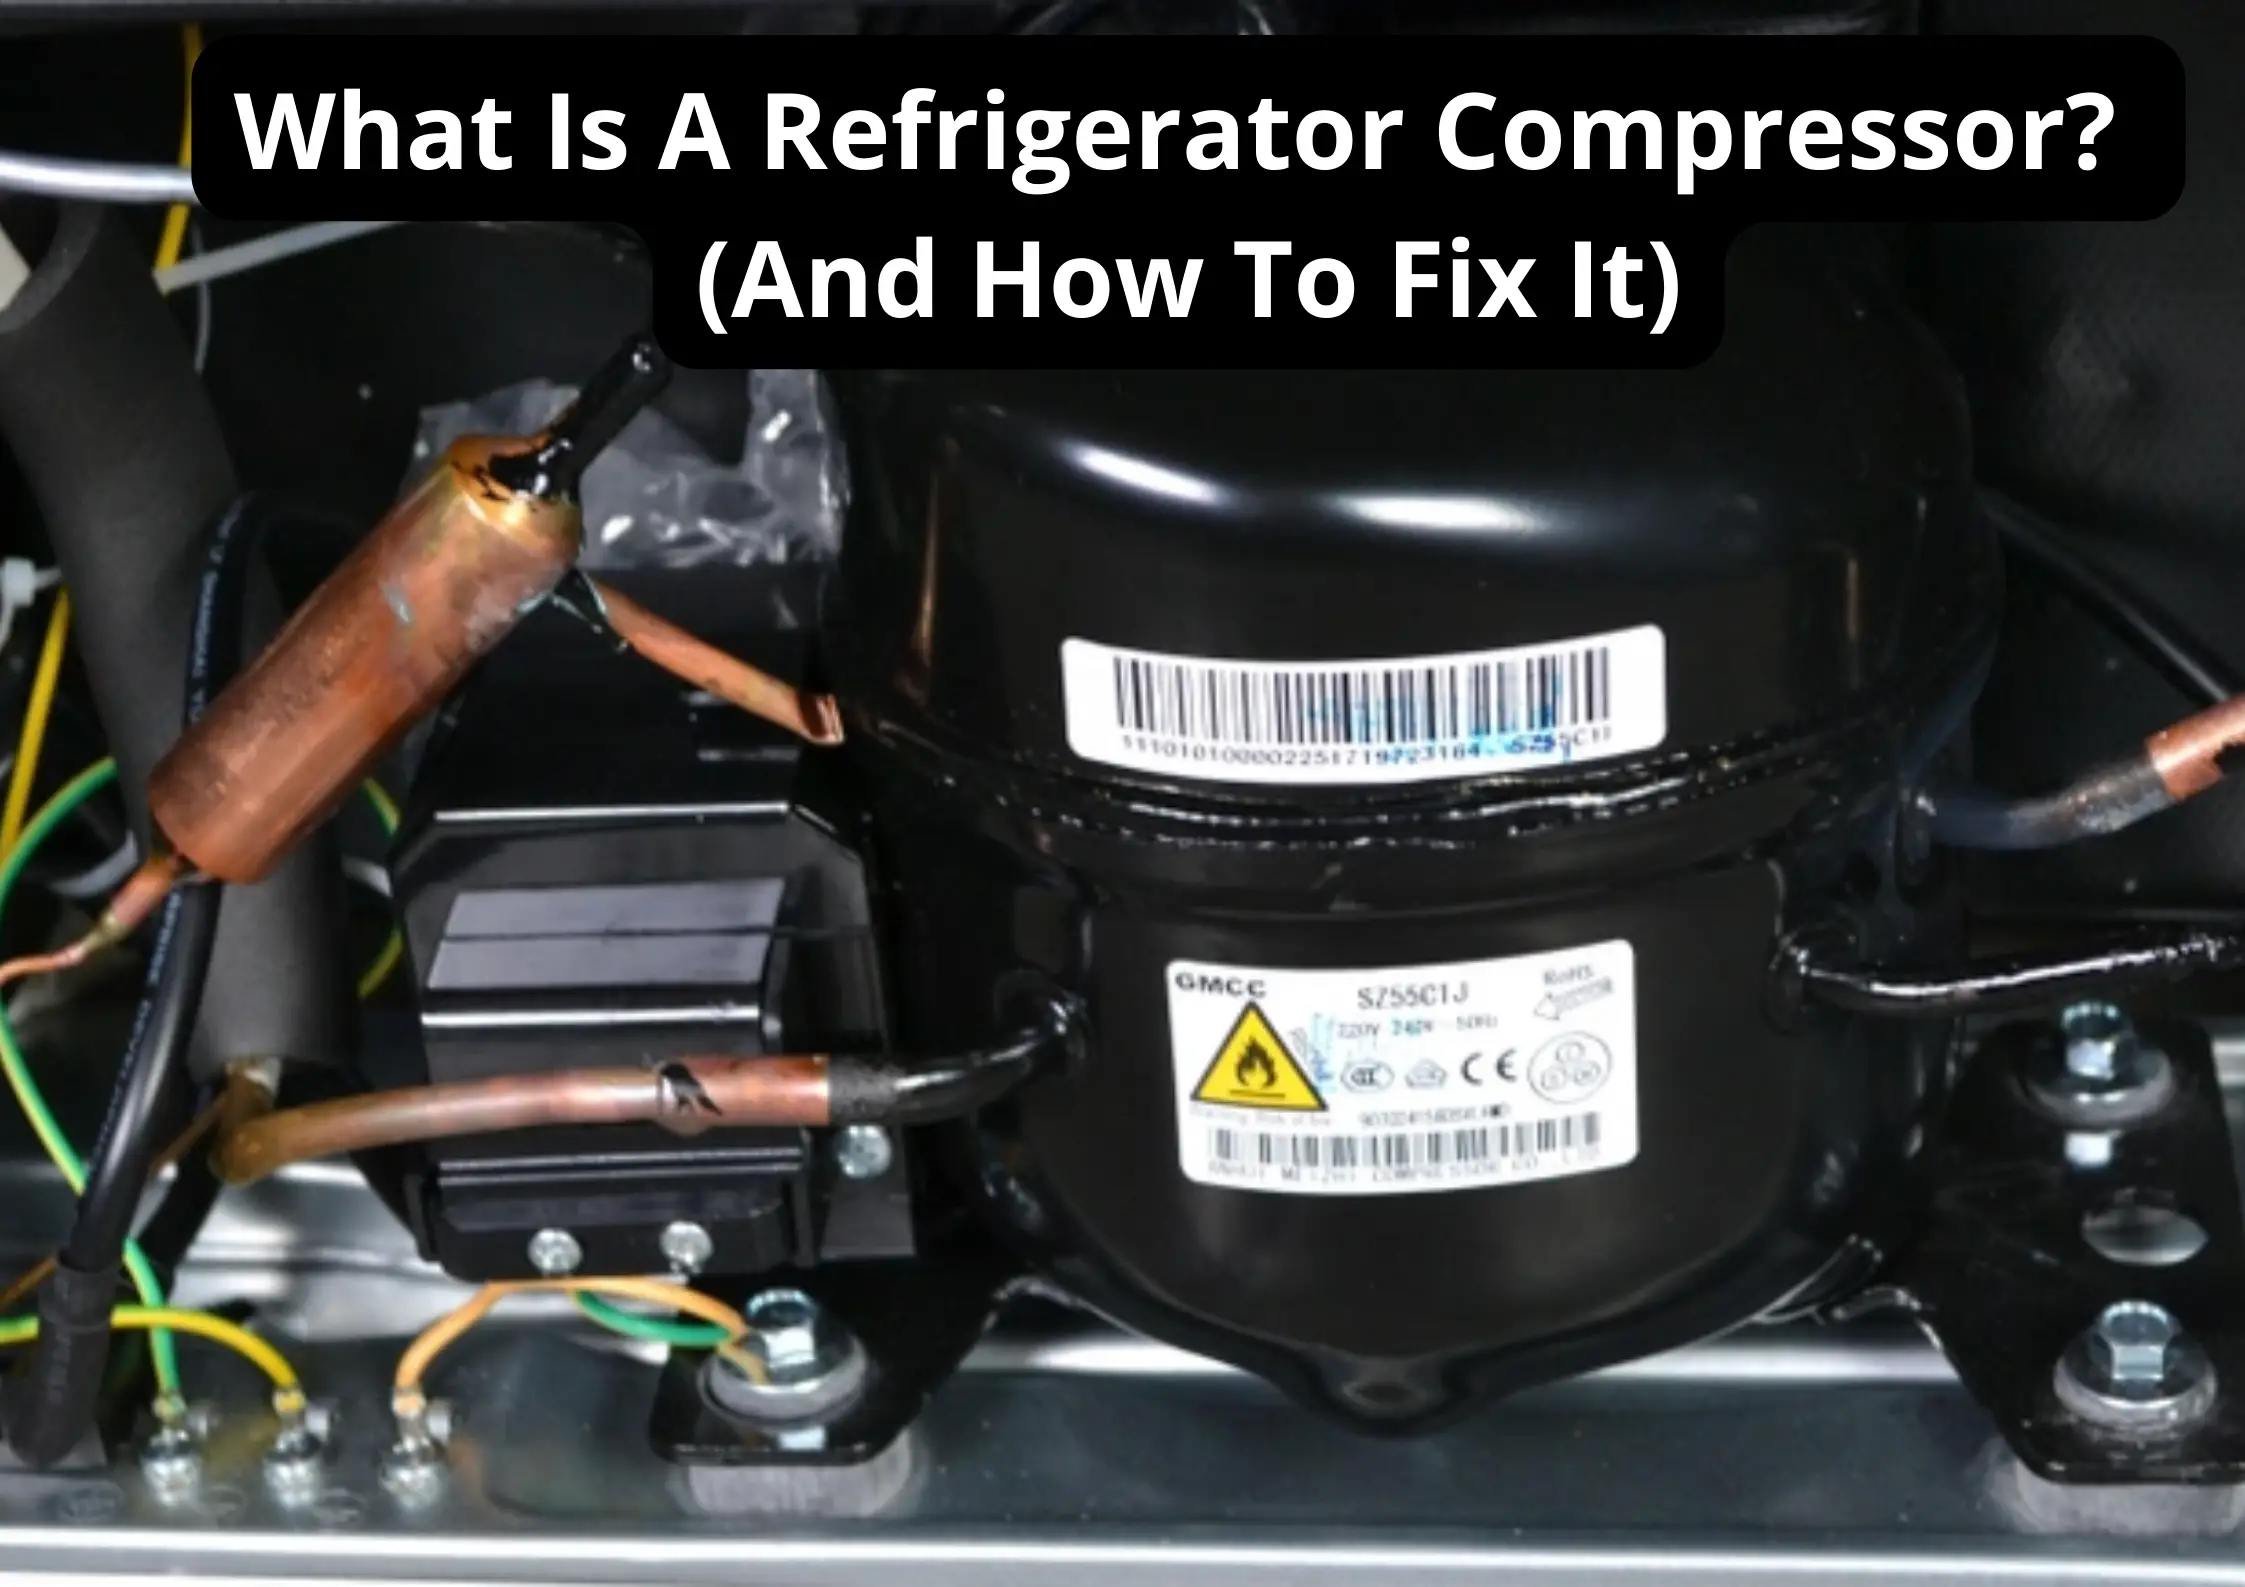 Why is the fridge compressor hot? (And How To Fix It)